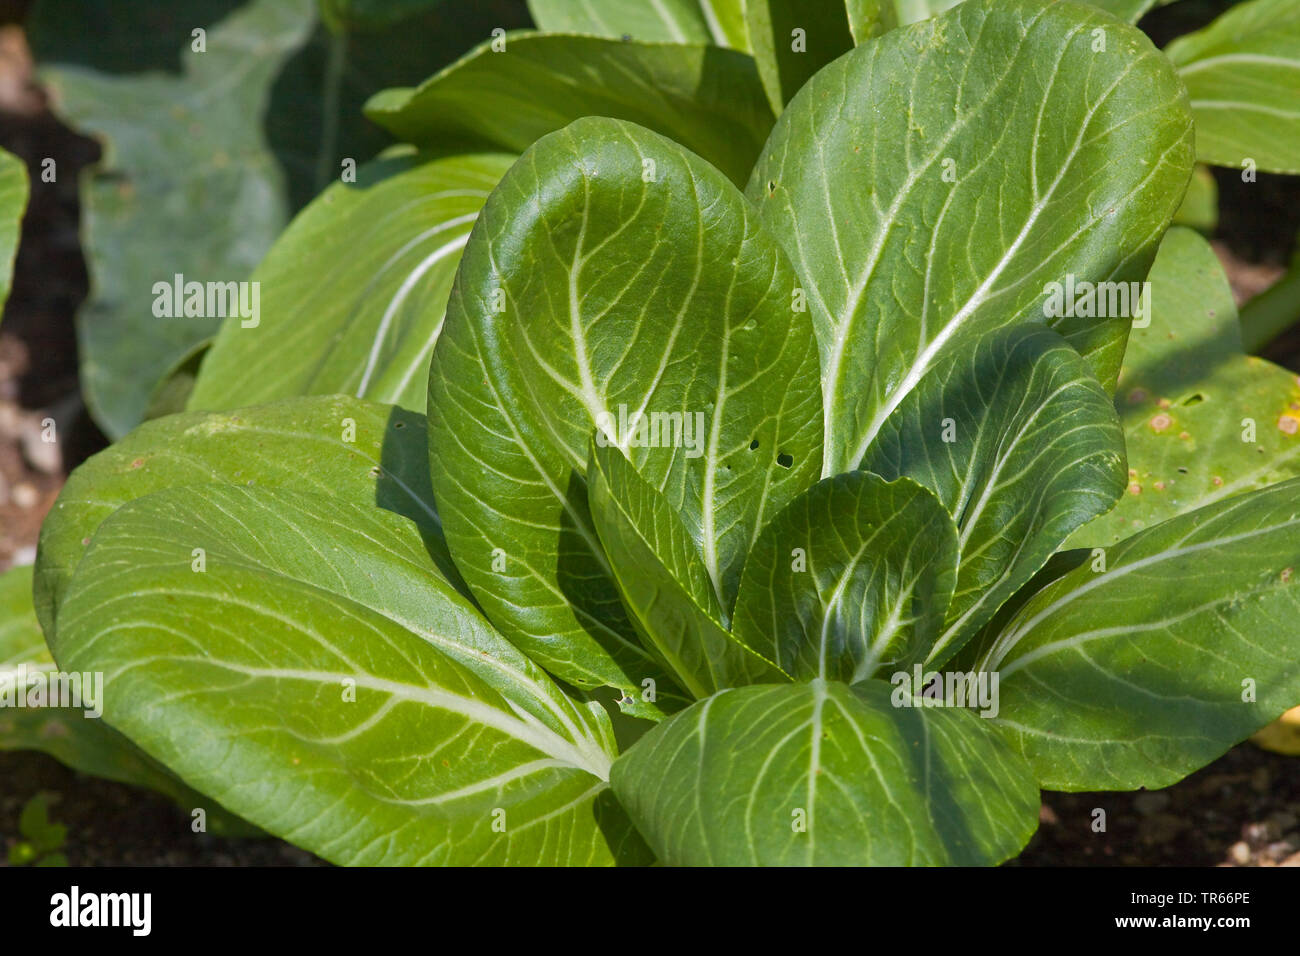 Chinese cabbage (Brassica rapa chinensis Syn. Brassica campestris chinensis)  (Brassica rapa chinensis, Brassica campestris chinensis), plant on a field, Germany Stock Photo